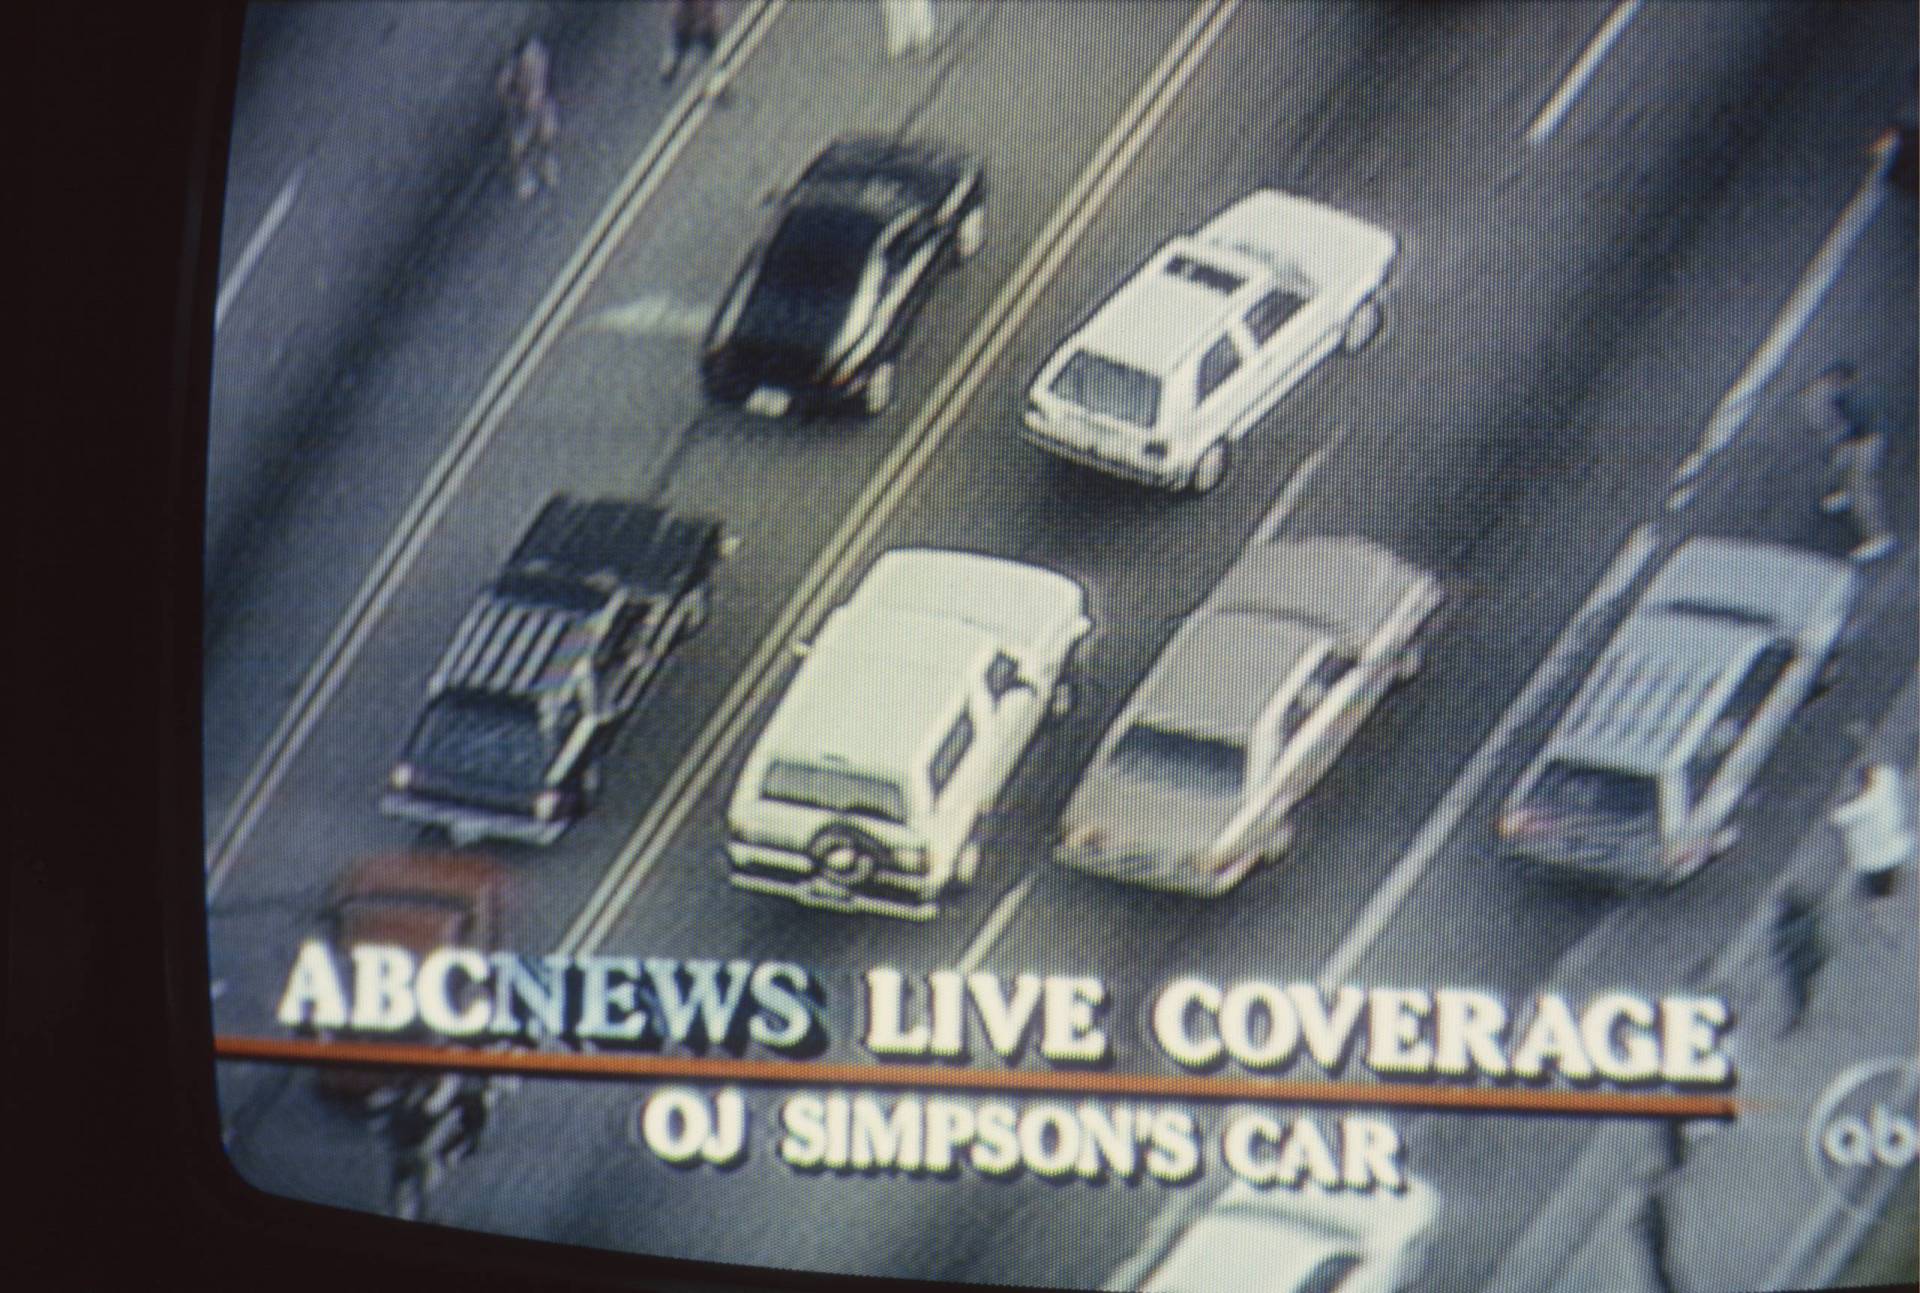 A photo of a tv screen showing cars lined up on a freeway. The caption says "ABC News Live Coverage. OJ Simpson's car."